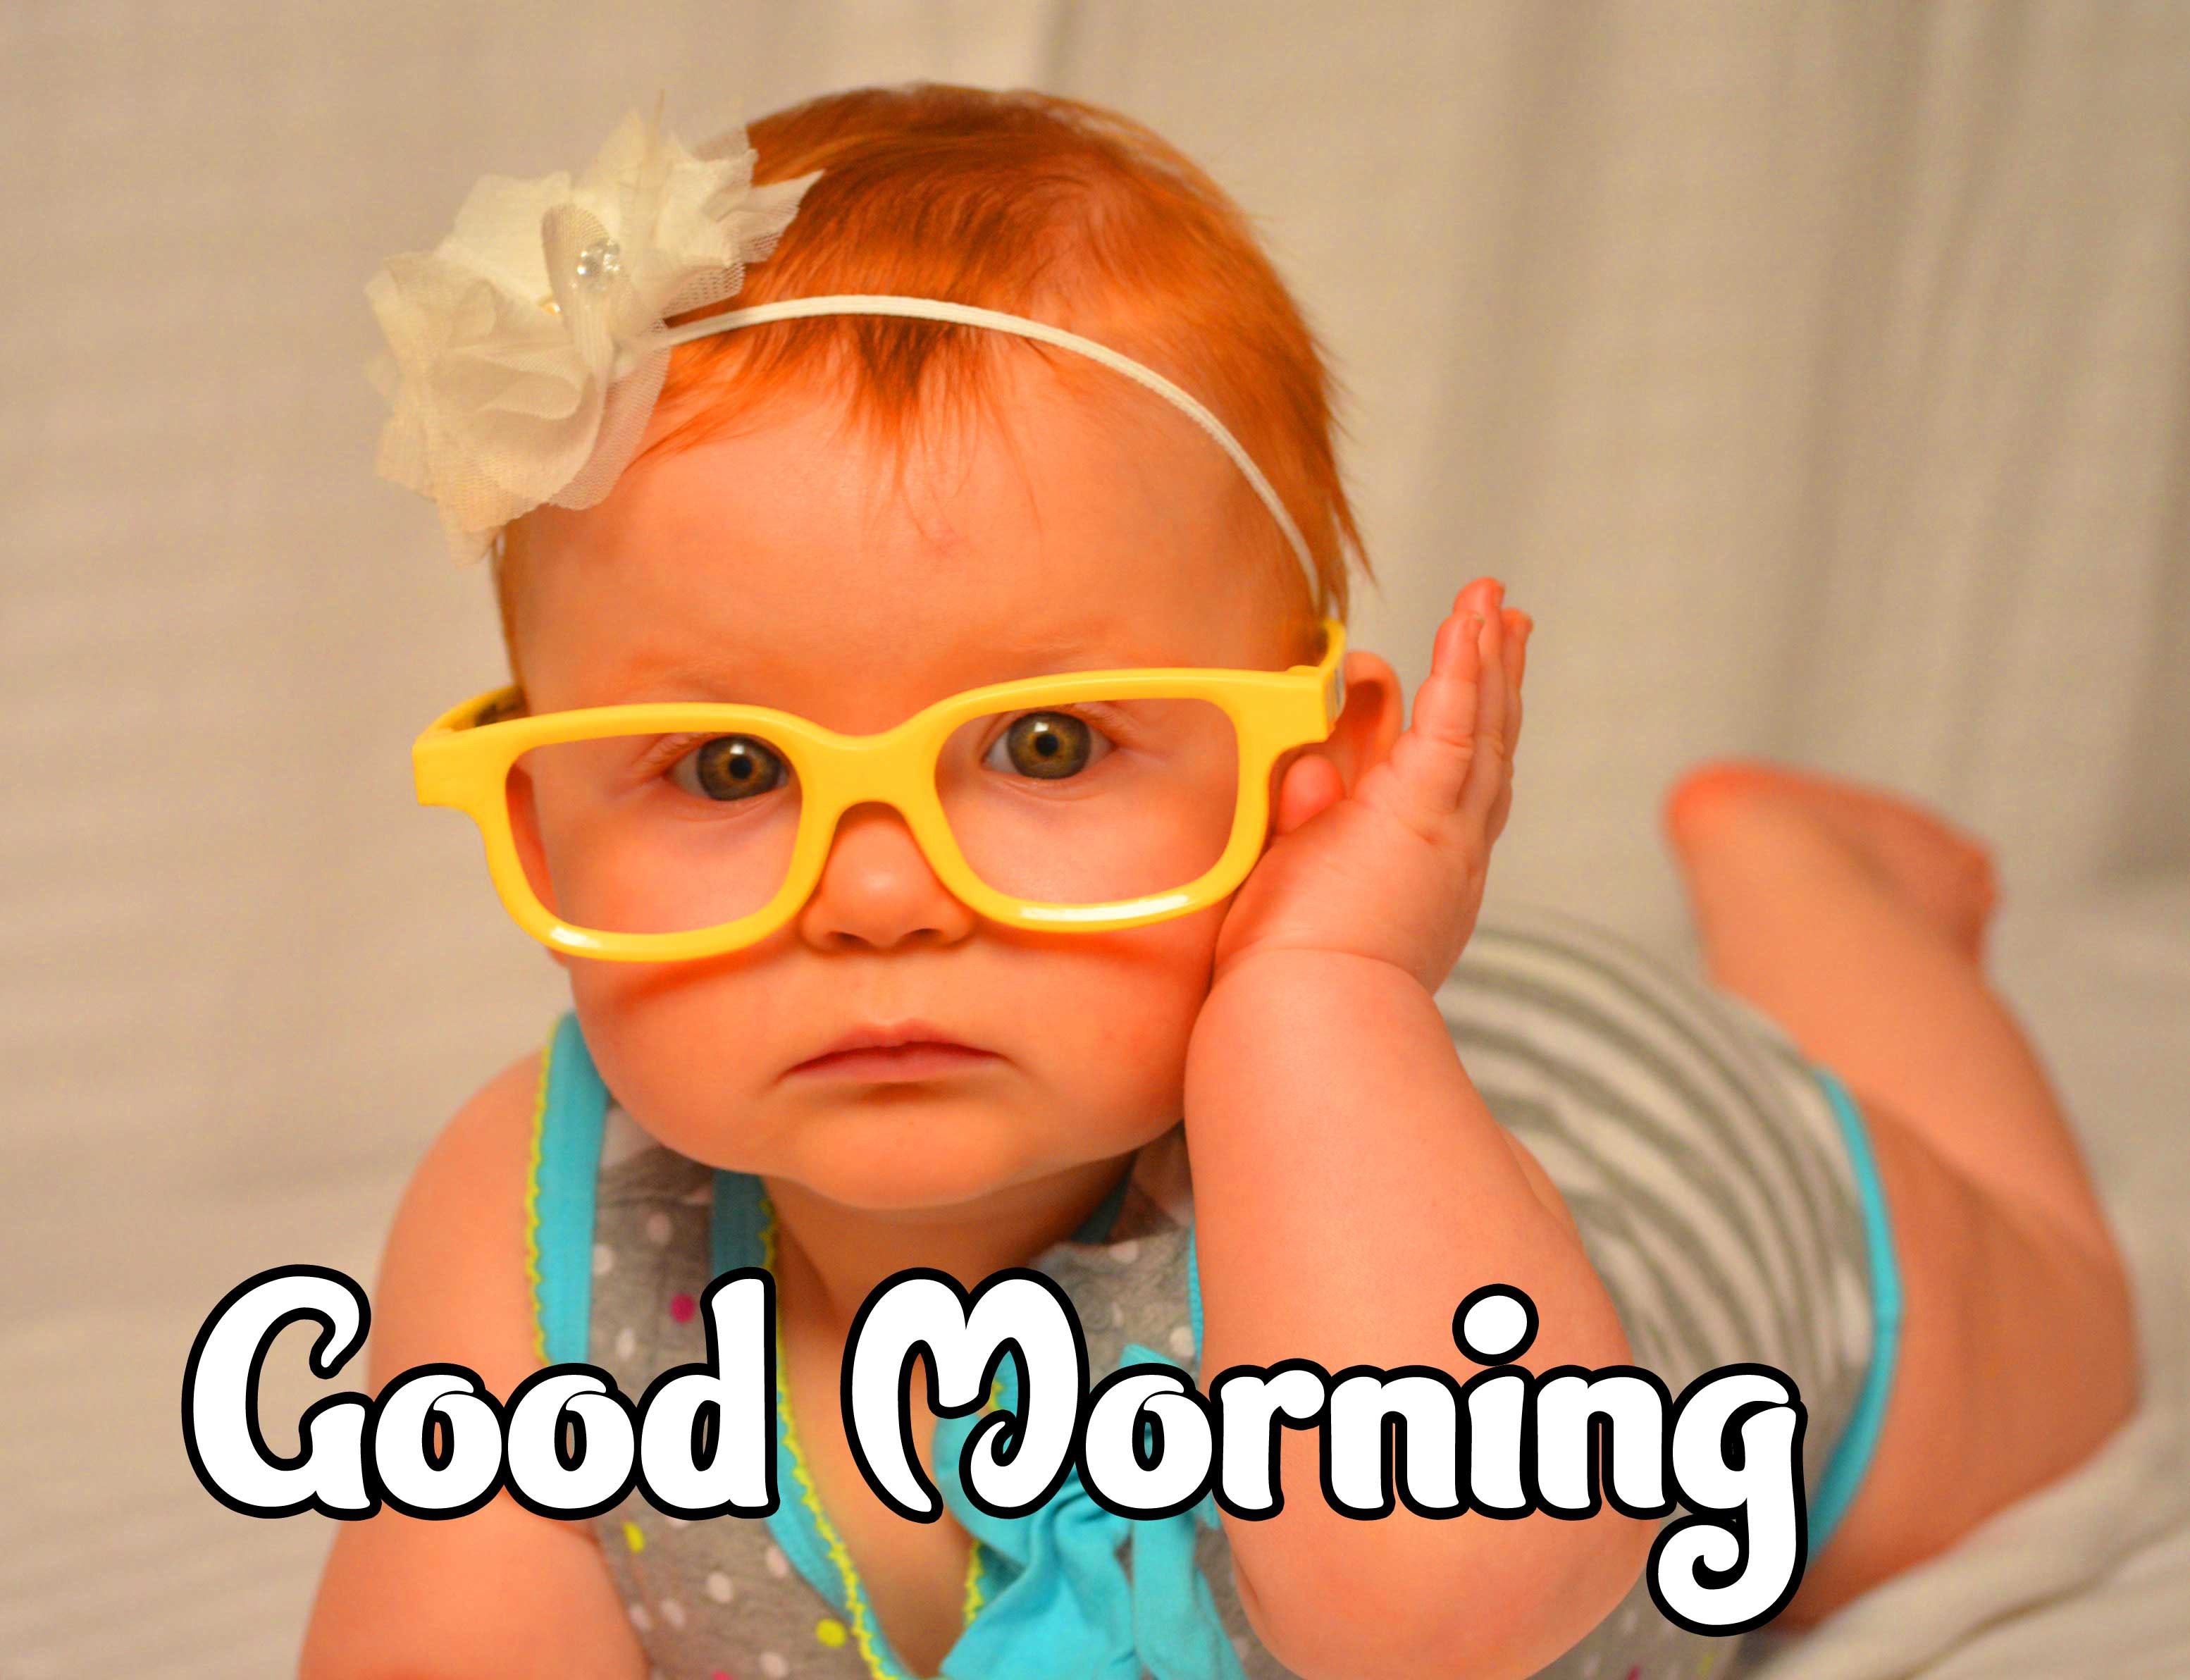 Good Morning Small Baby Images Pics Wallpaper Free Download 